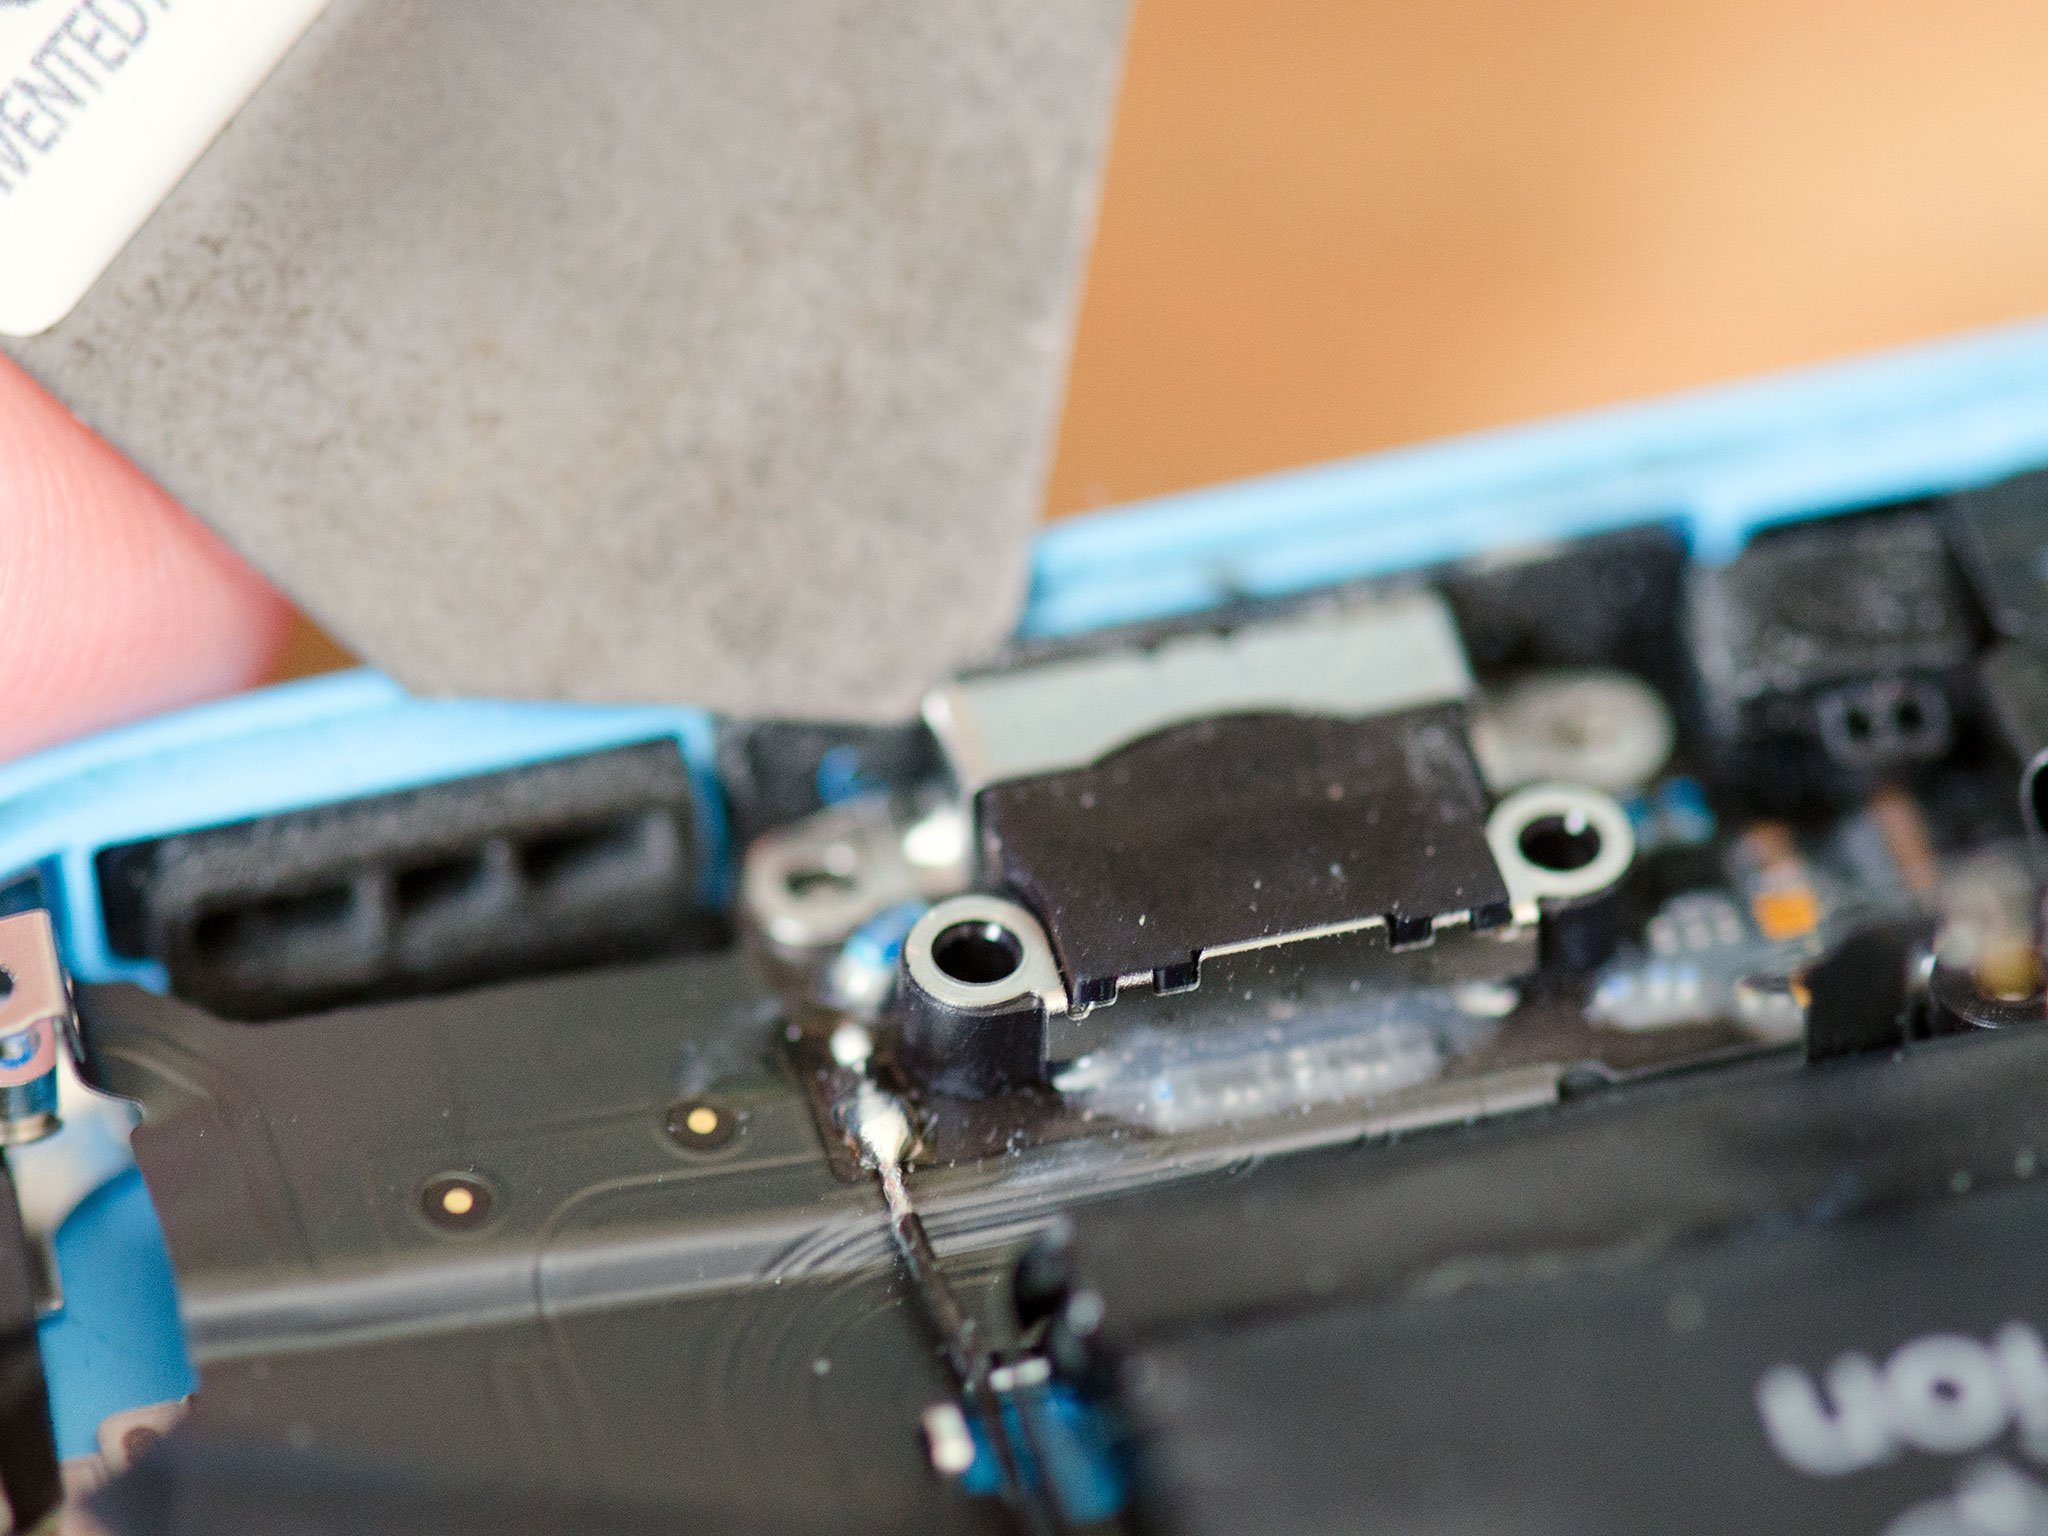 How to DIY replace the Lightning dock in an iPhone 5c